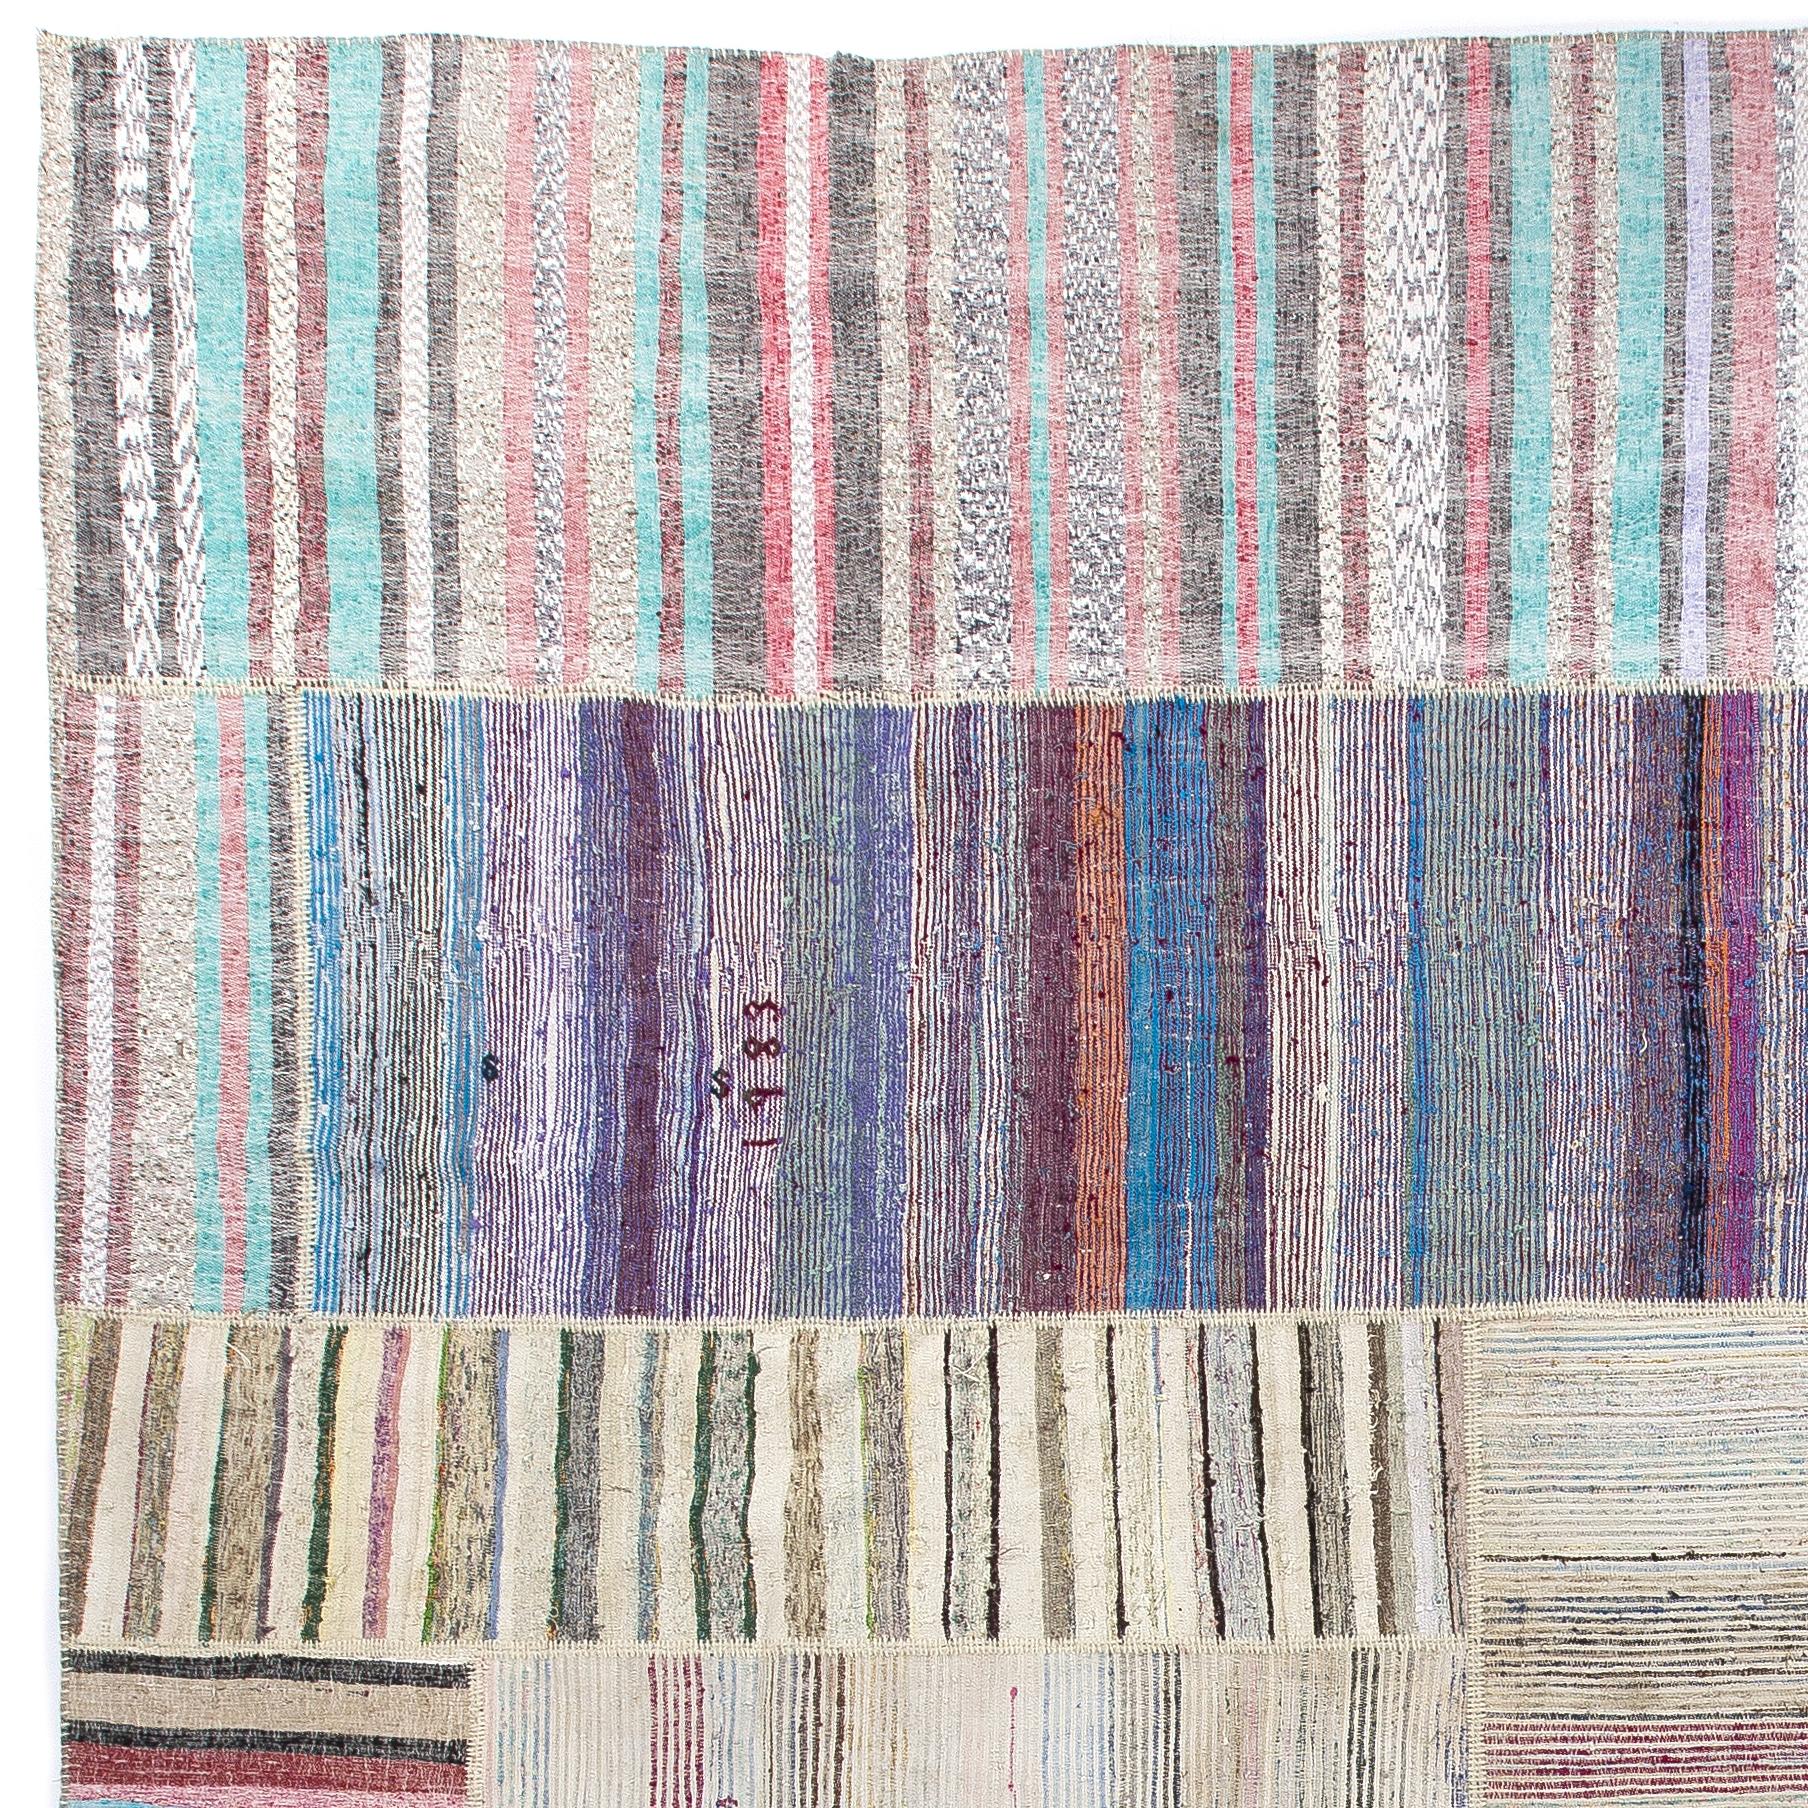 Size: 13`3`` x 17`5``  We can alter the dimensions and make it smaller or larger if requested. 

These authentic flat-weaves (Kilims) from Eastern Turkey were handwoven by Nomads until late 20th century to be used as floor coverings in their